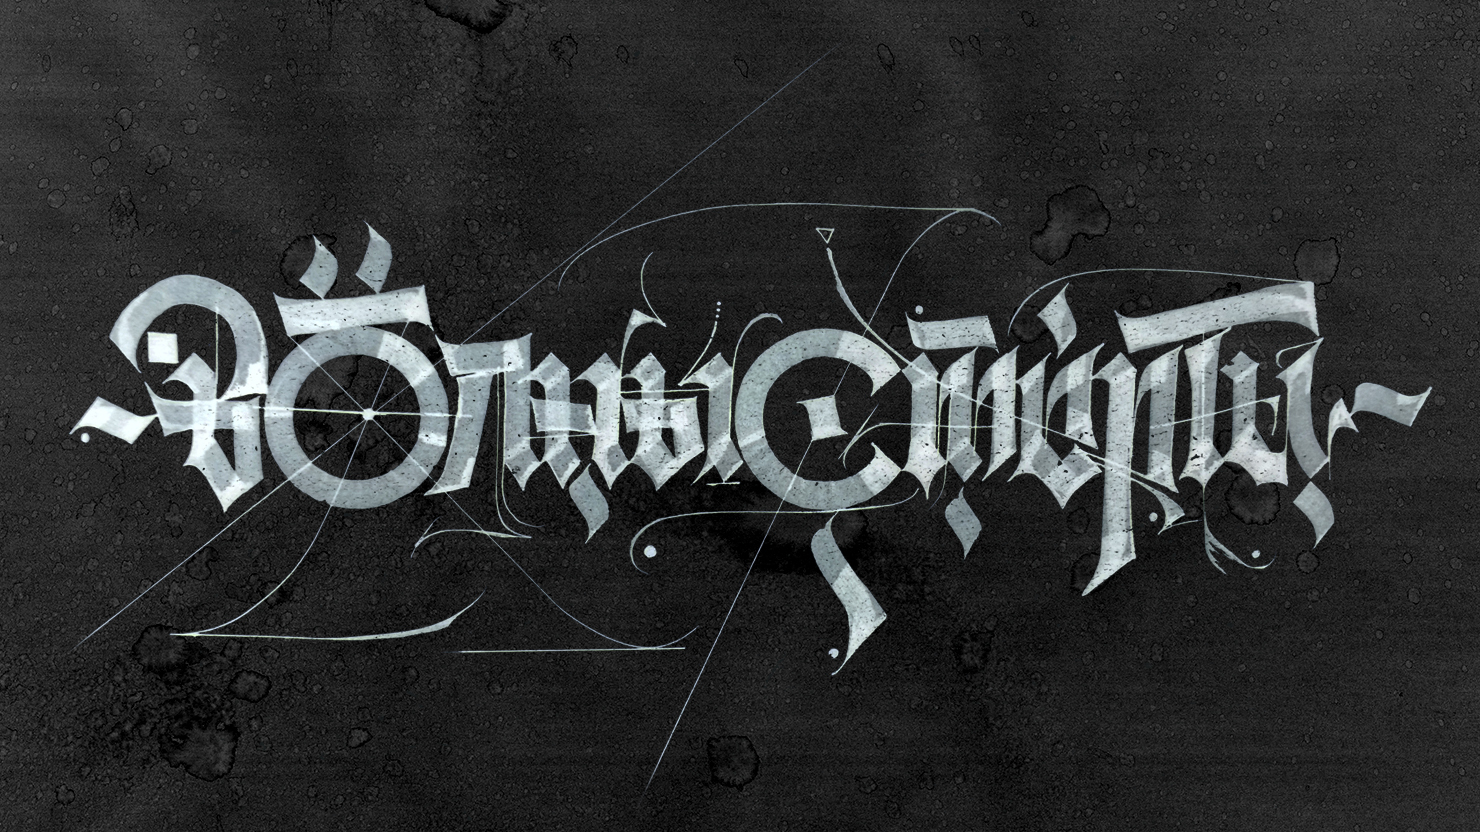 Modern gothic calligraphy. Part 2 - My, Calligraphy, Lettering, Letters, Modern Art, Gothic, Creation, Writing, Longpost